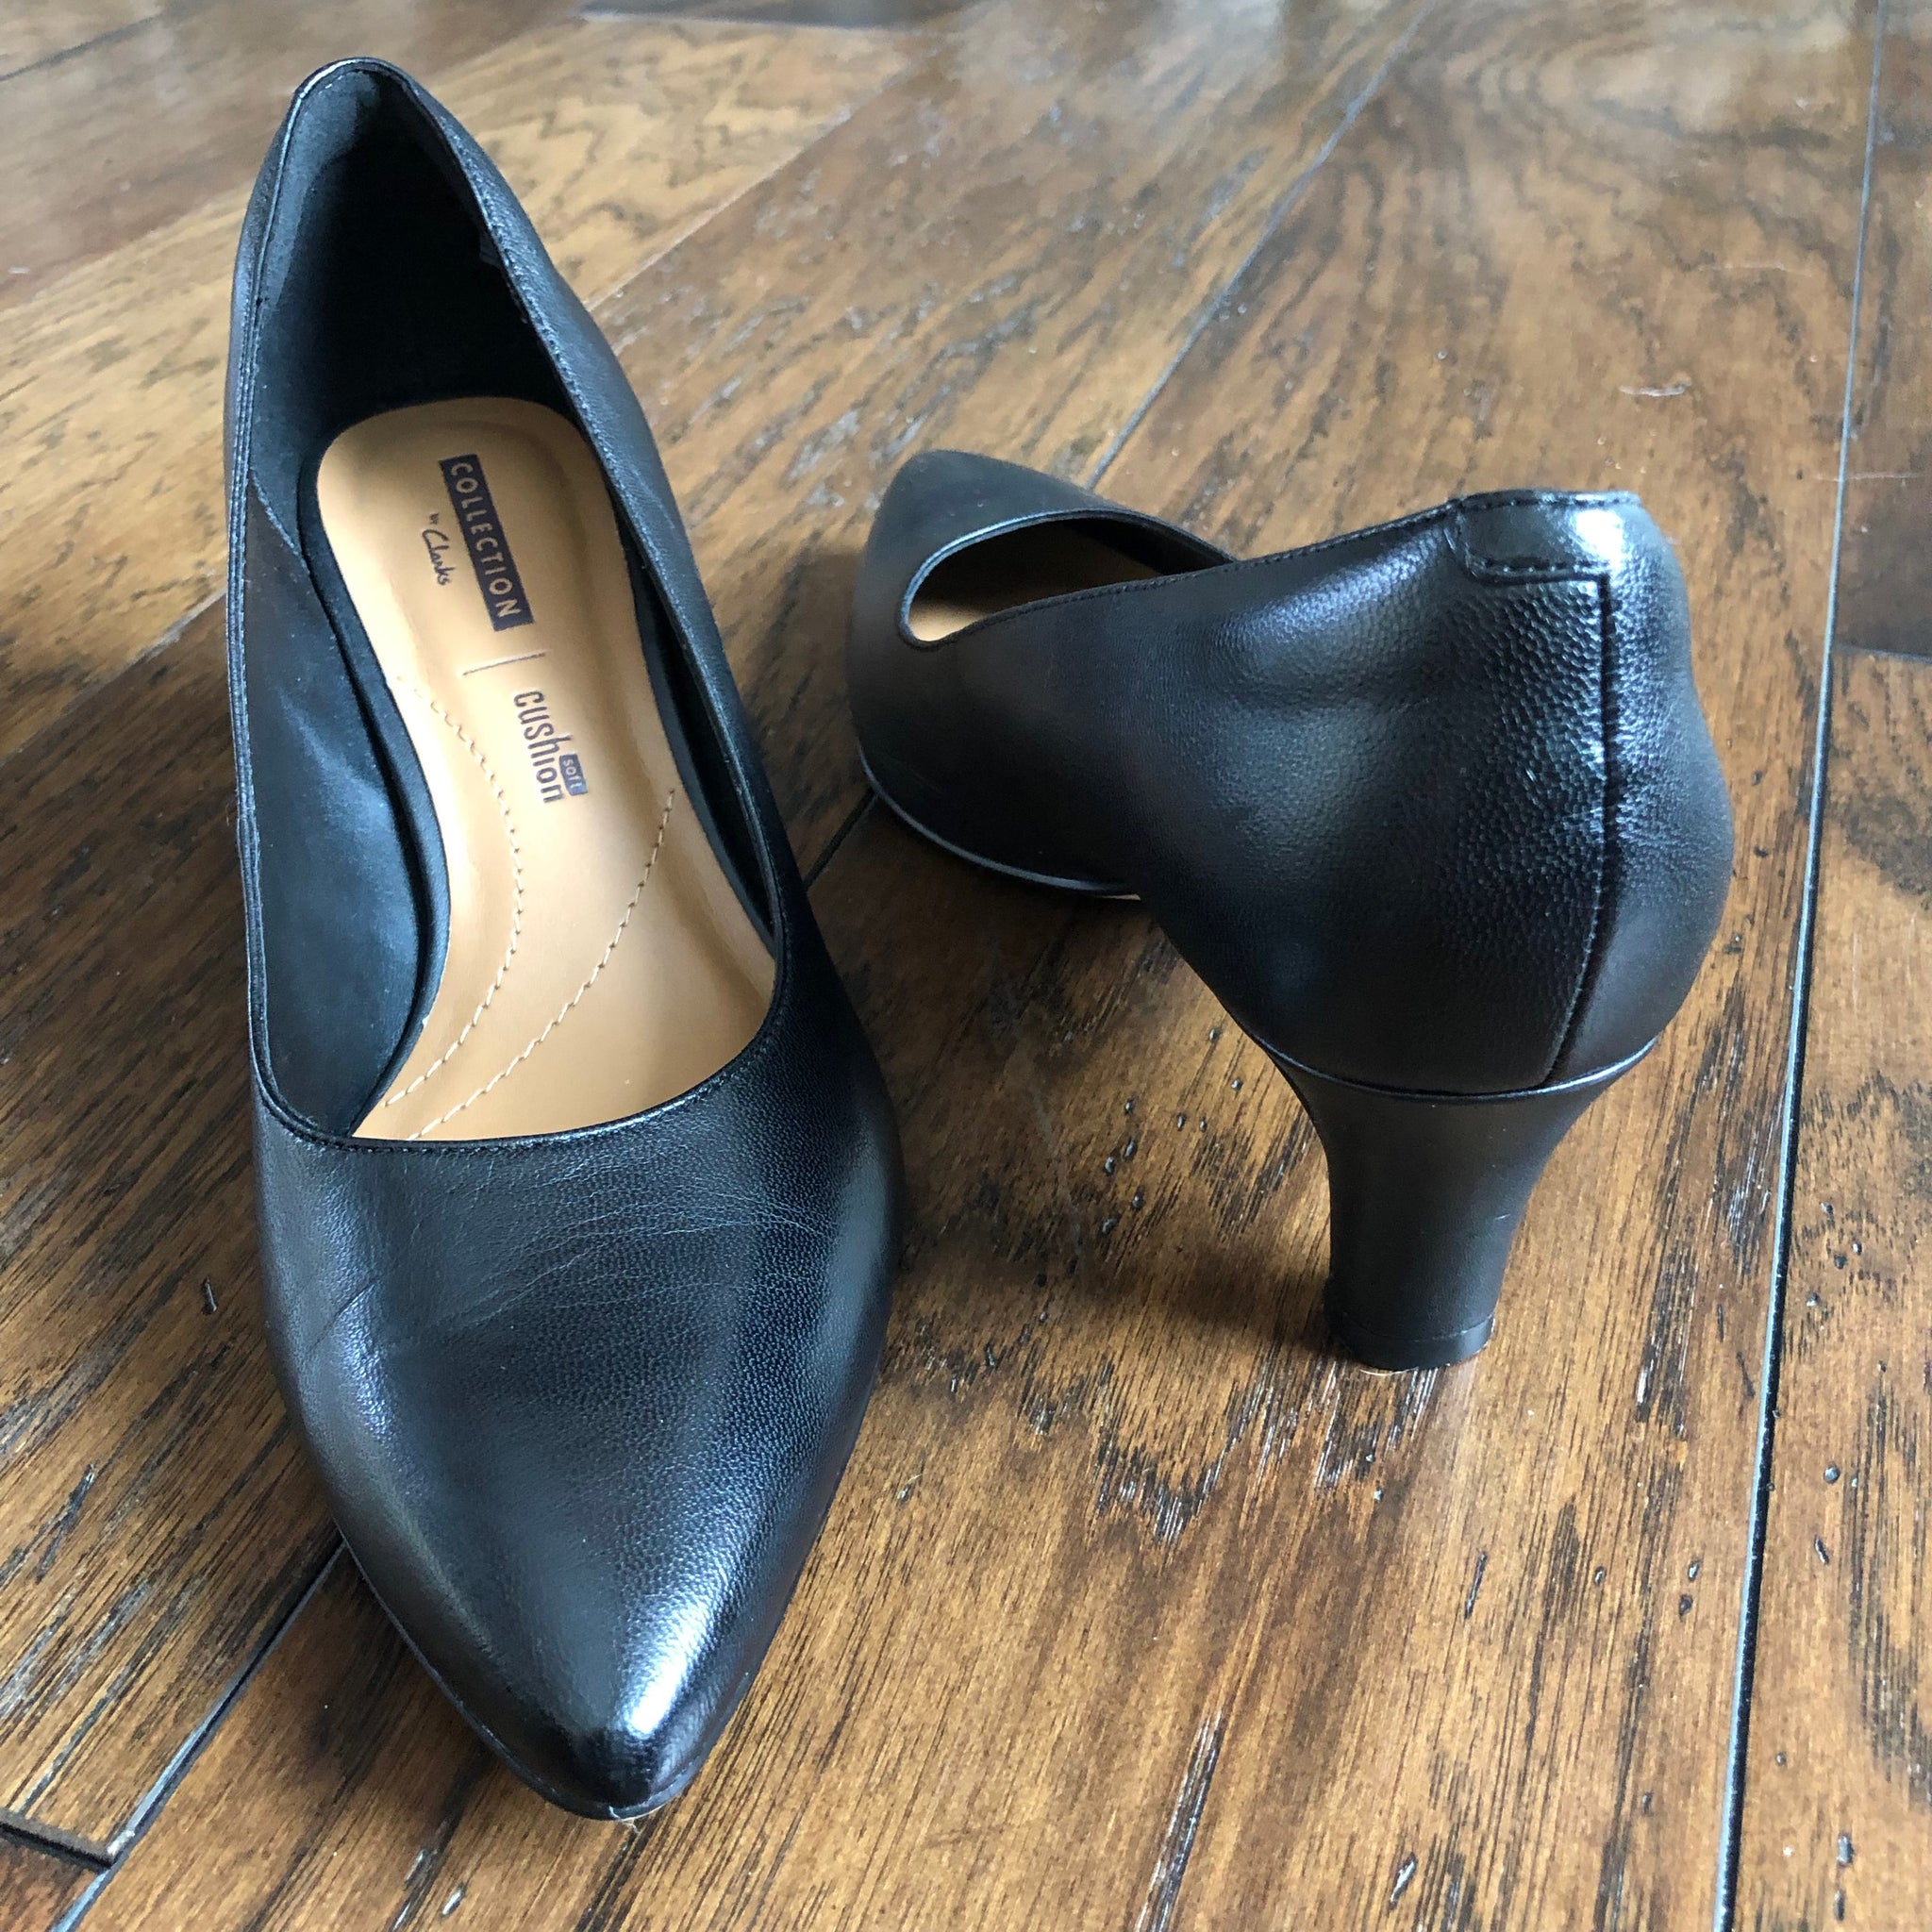 clarks cushion soft leather wick pumps